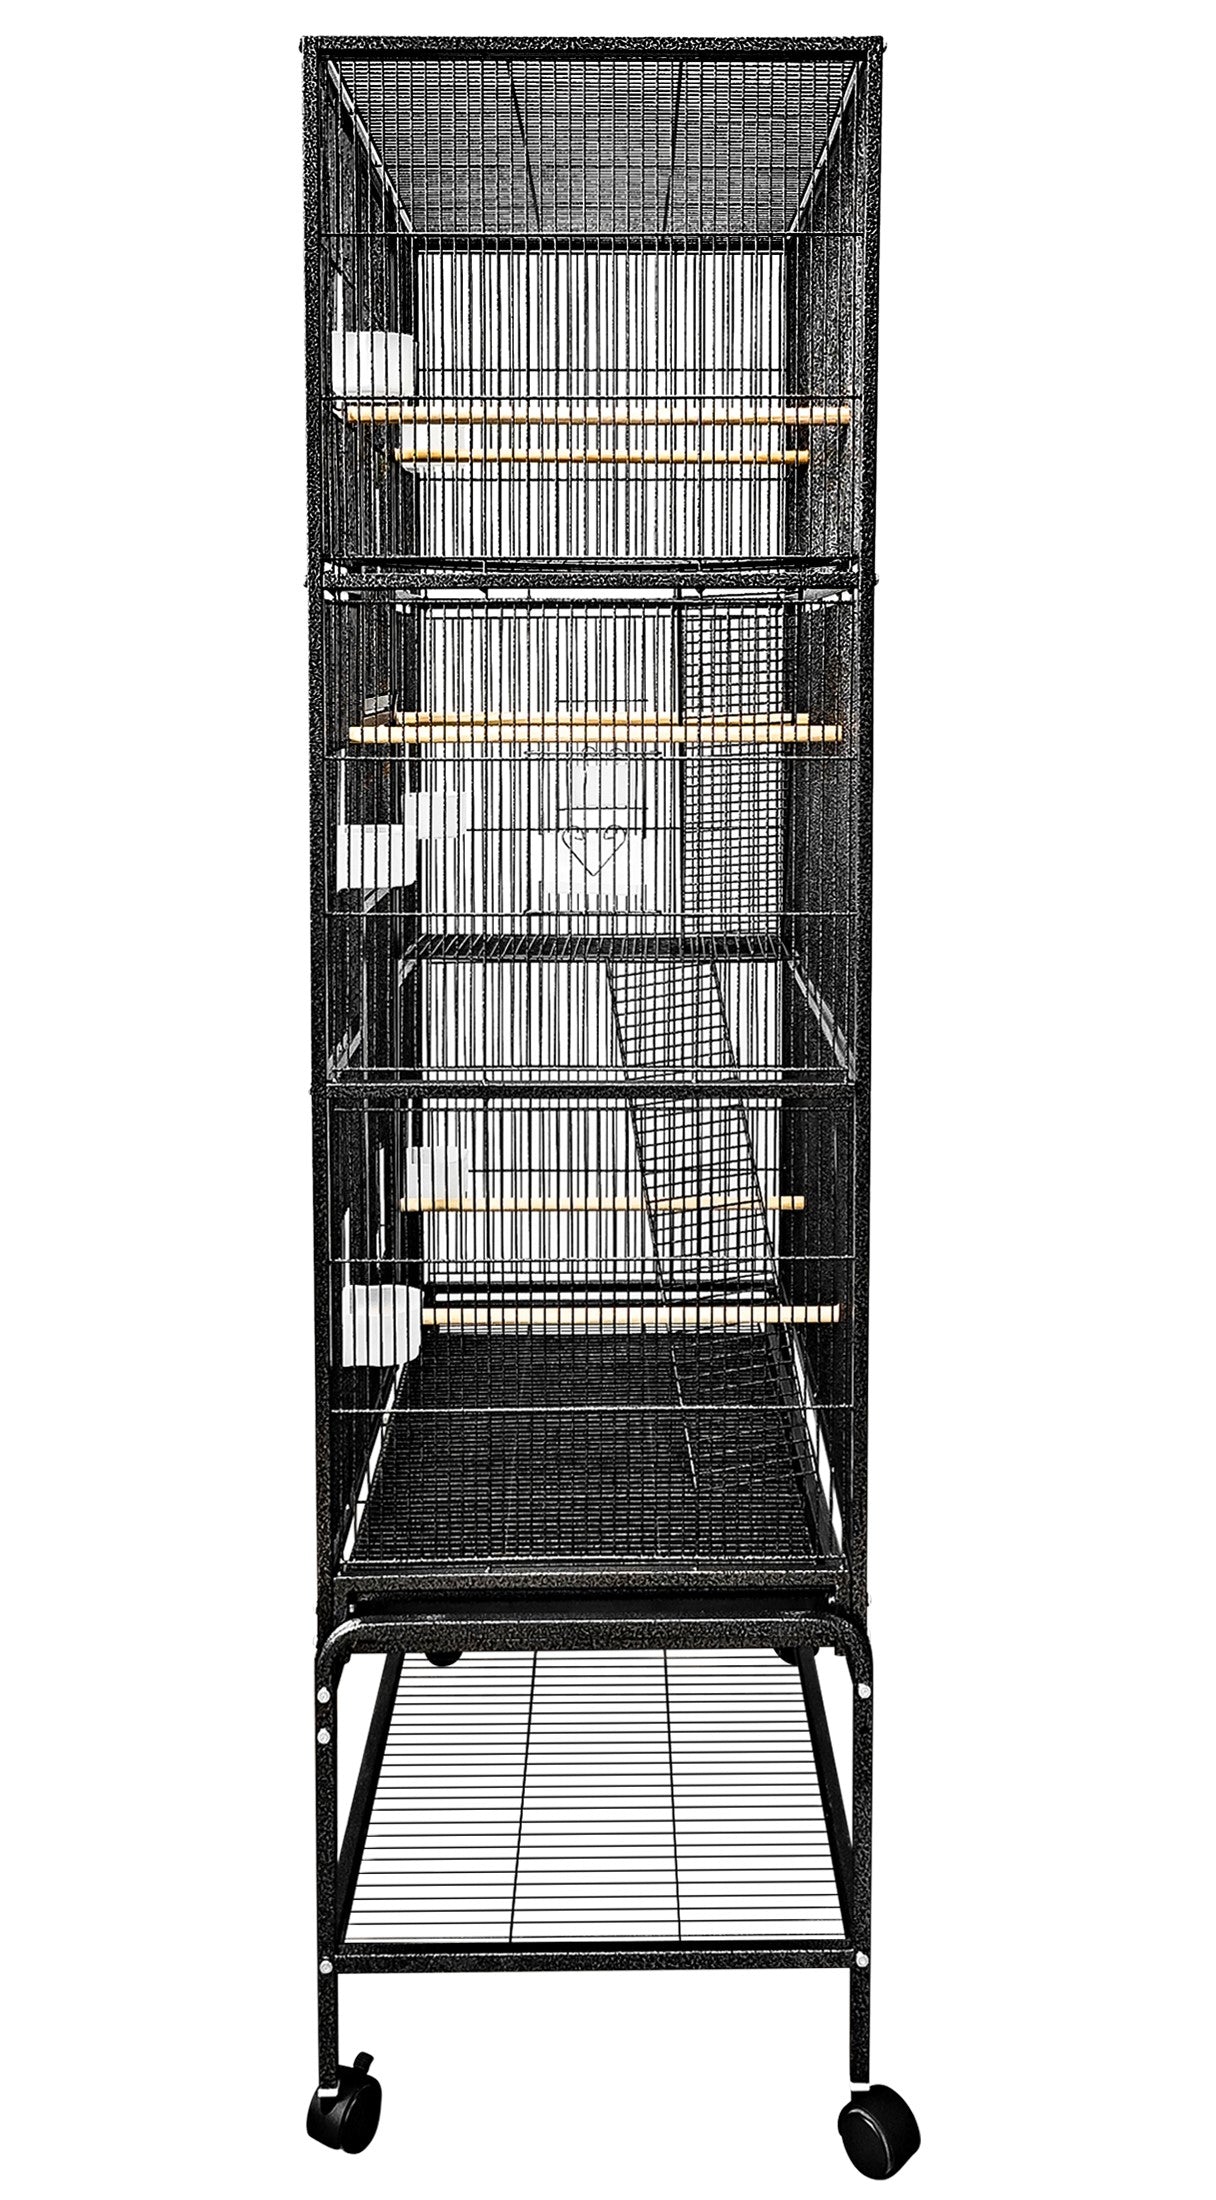 A&E Cage Co. 32"x18" Multi Level Flight Cage with Ladders